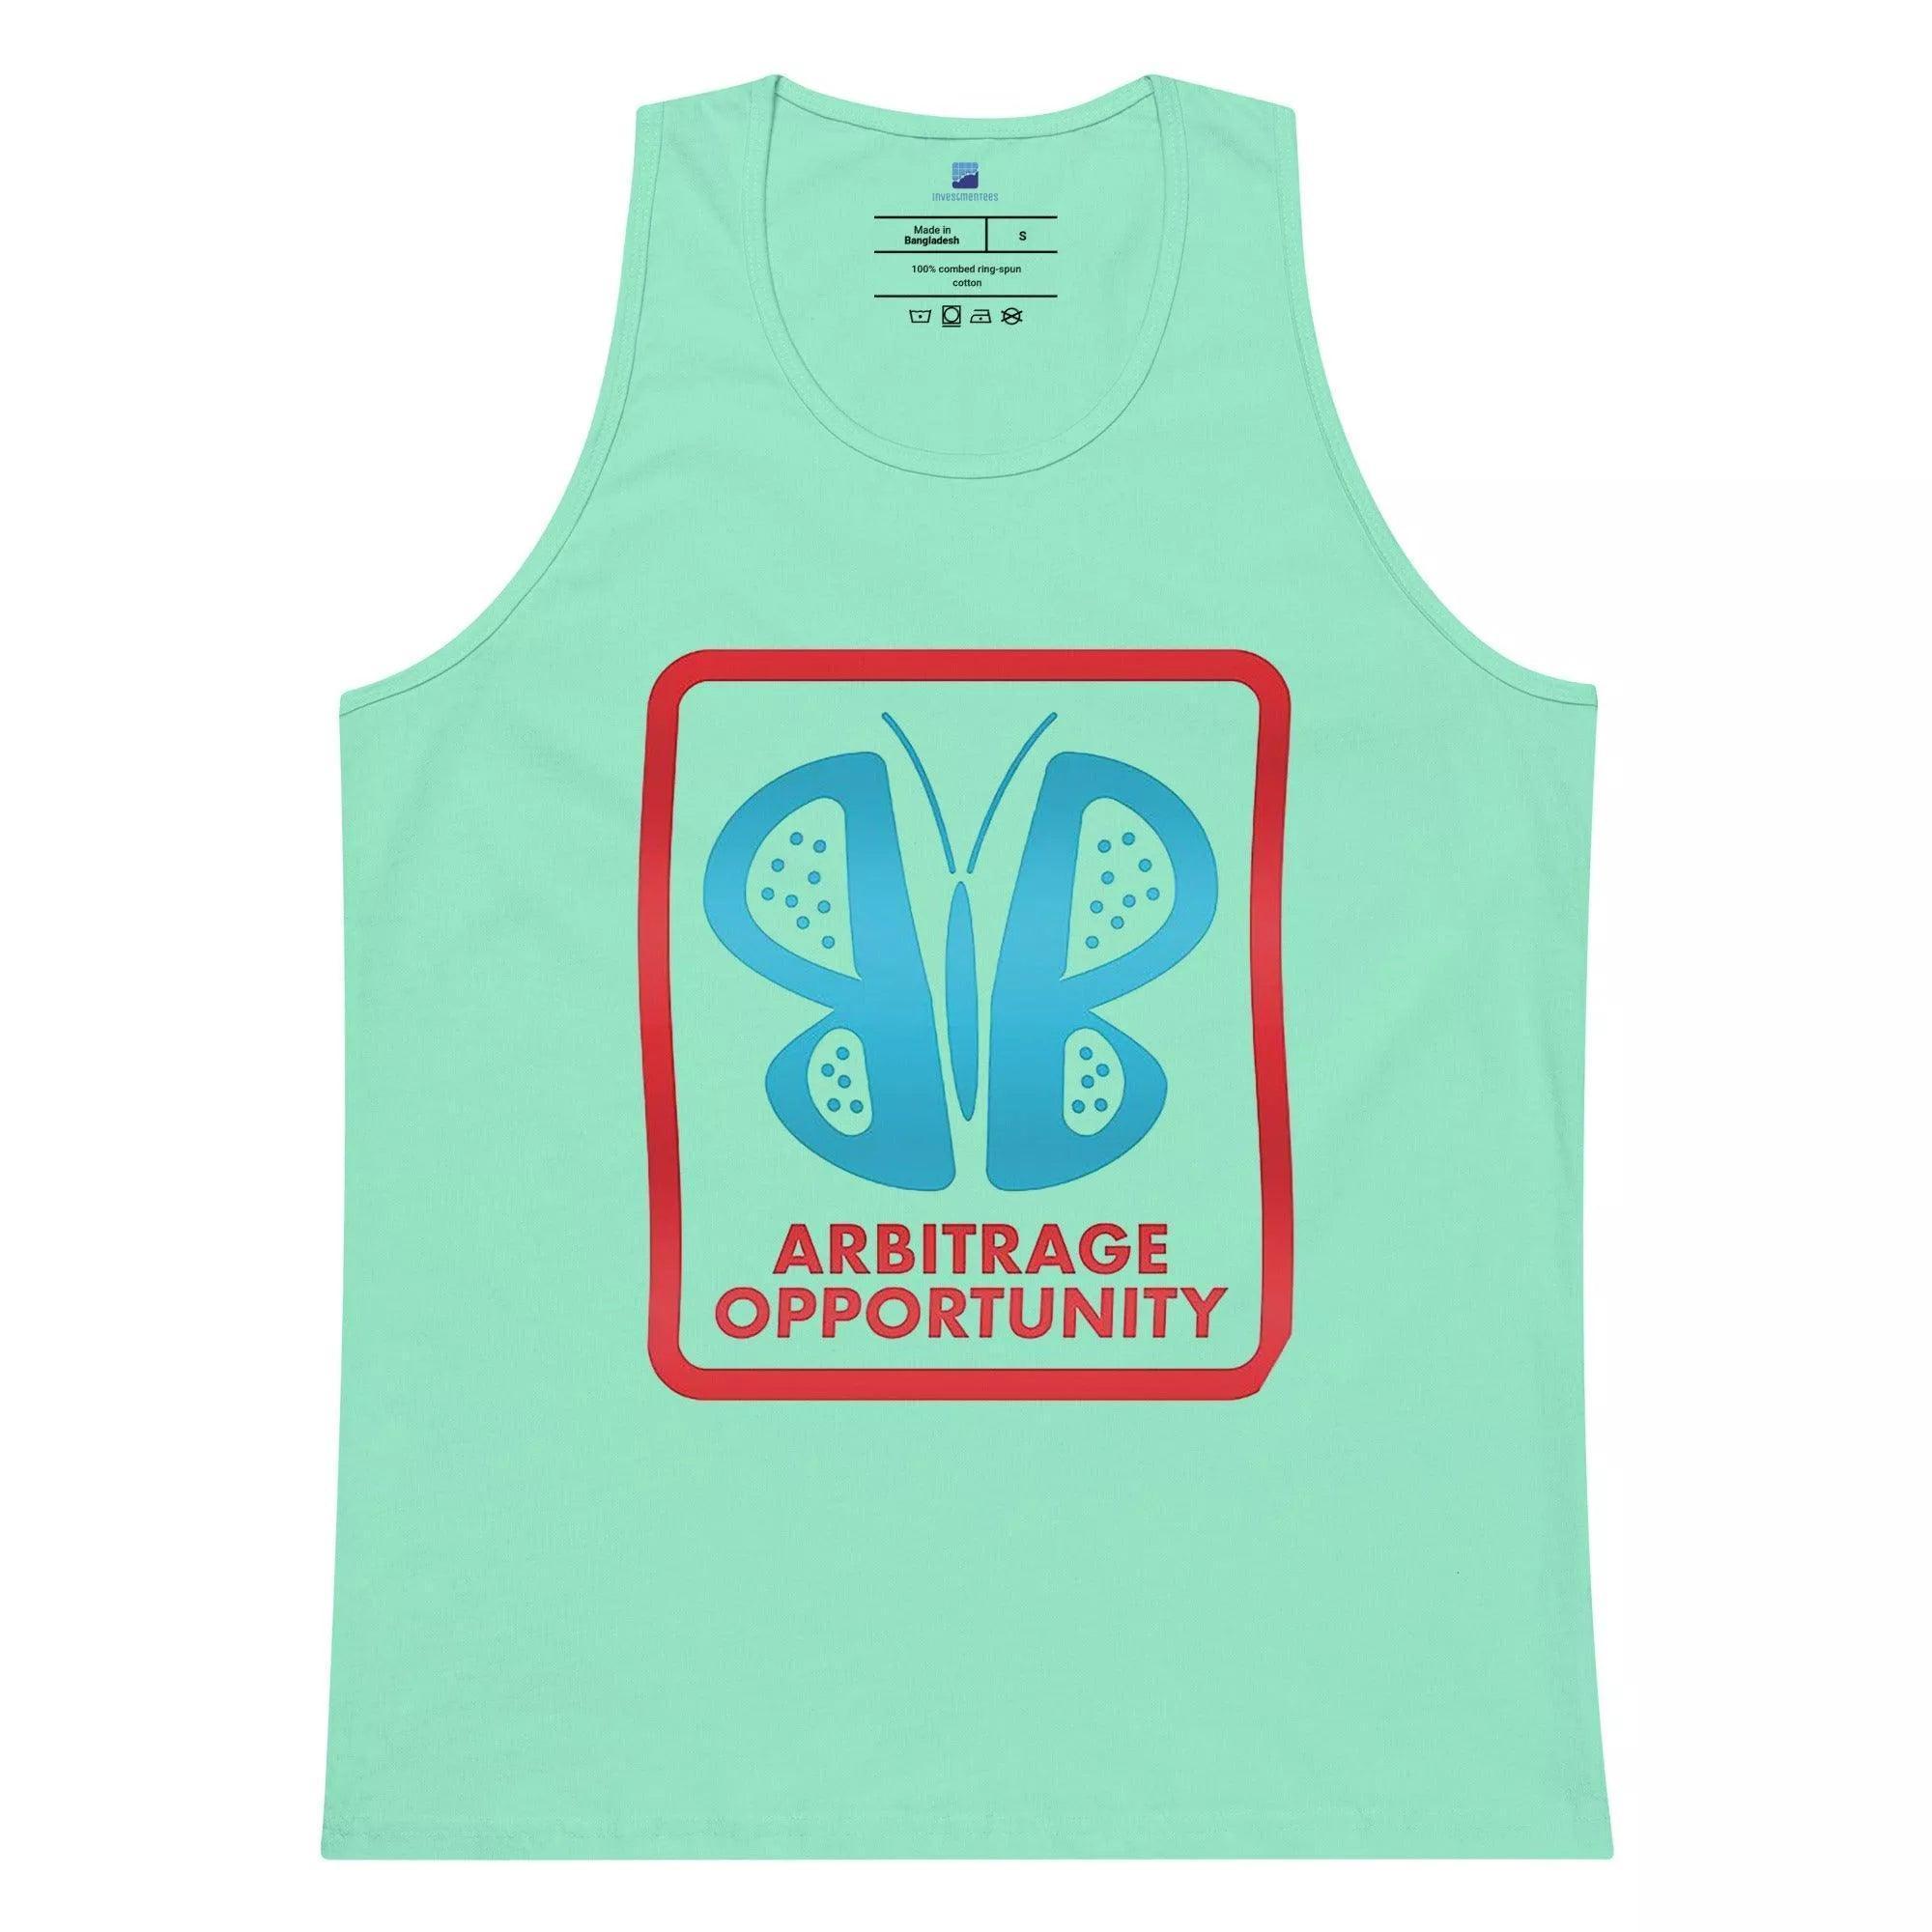 Arbitrage Opportunity Tank Top - InvestmenTees